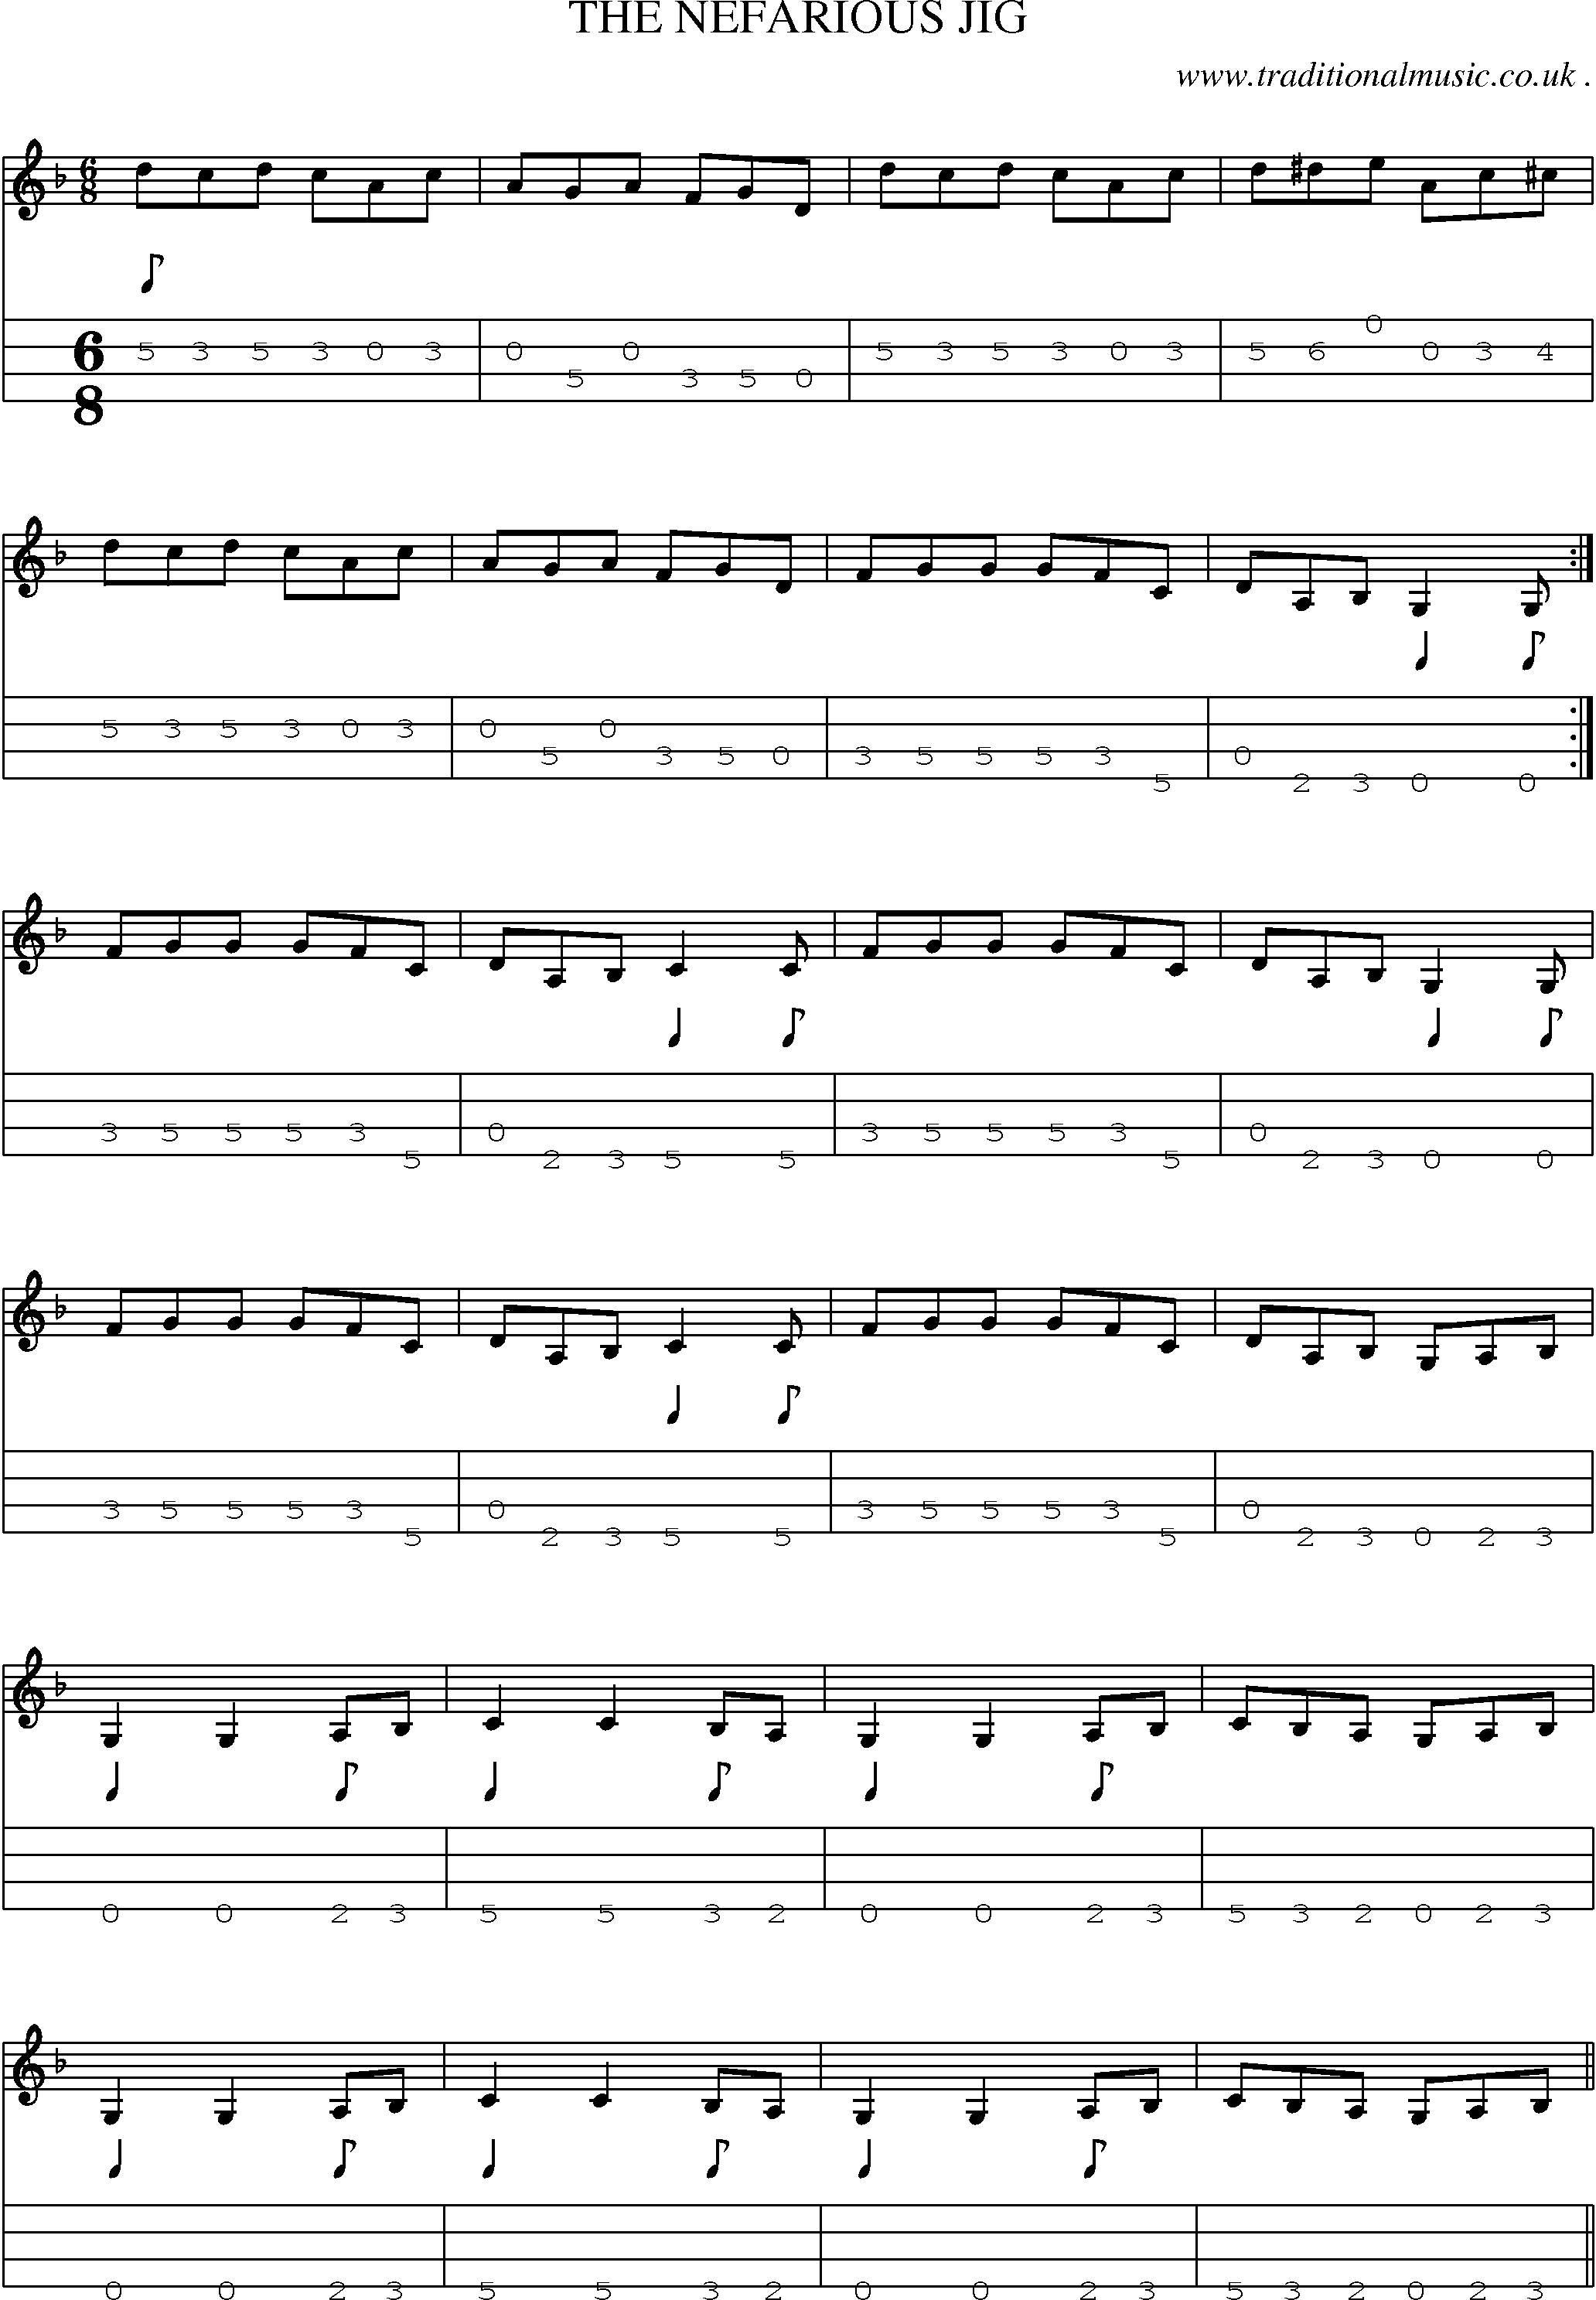 Sheet-Music and Mandolin Tabs for The Nefarious Jig